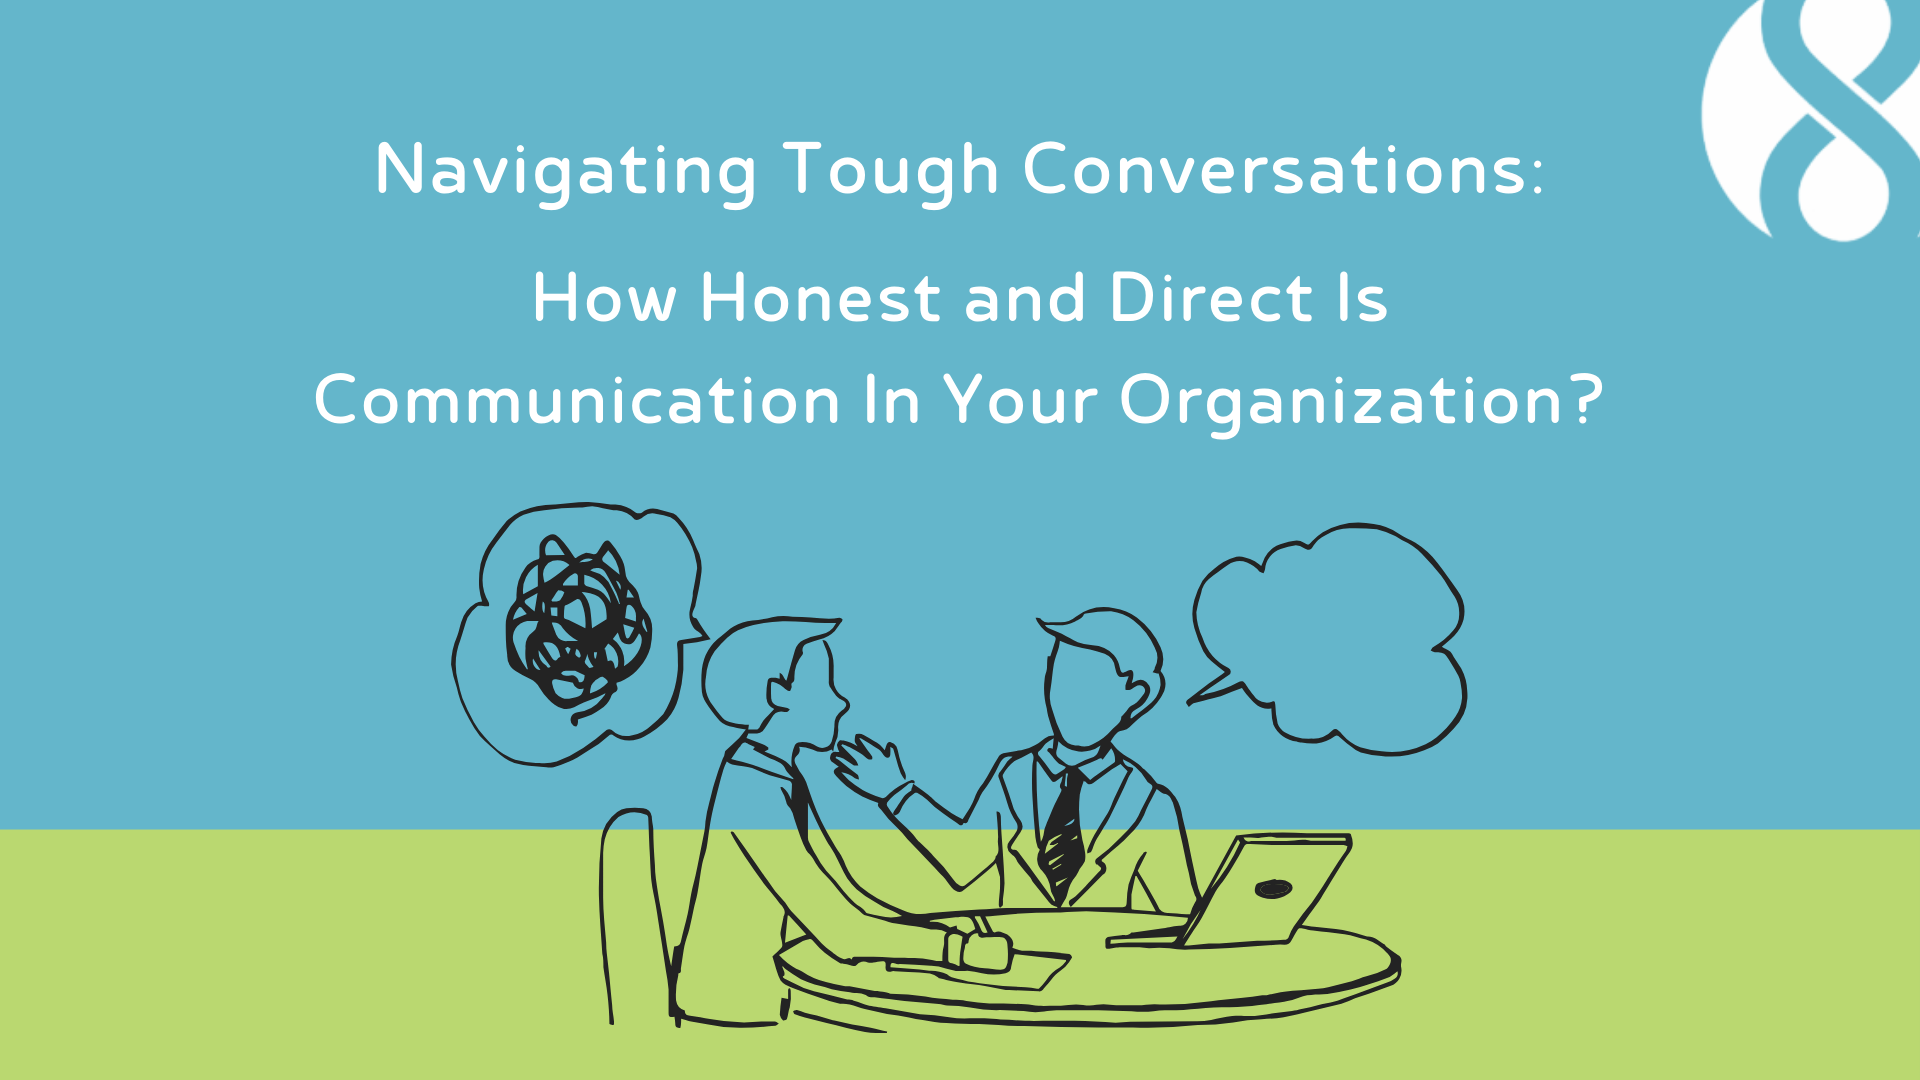 https://rumin8group.com/navigating-tough-conversations-how-to-have-honest-direct-communication-in-your-organization-and-team/